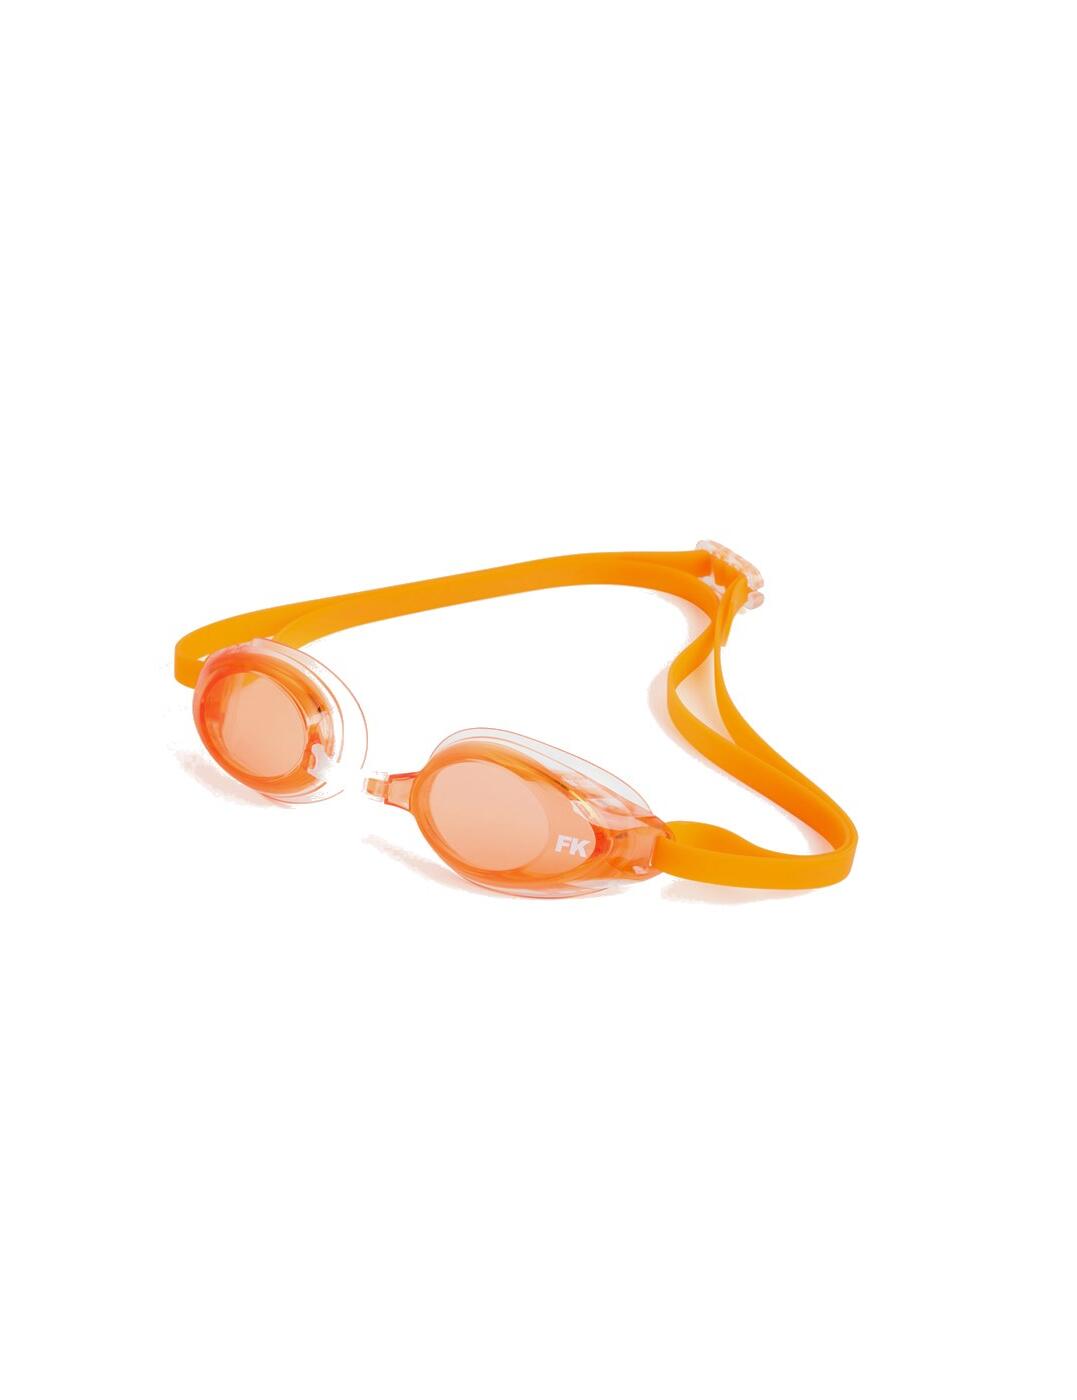 FKG021L01105 Funkita Flame Thrower Goggles - FKG021L01105 Flame Thrower